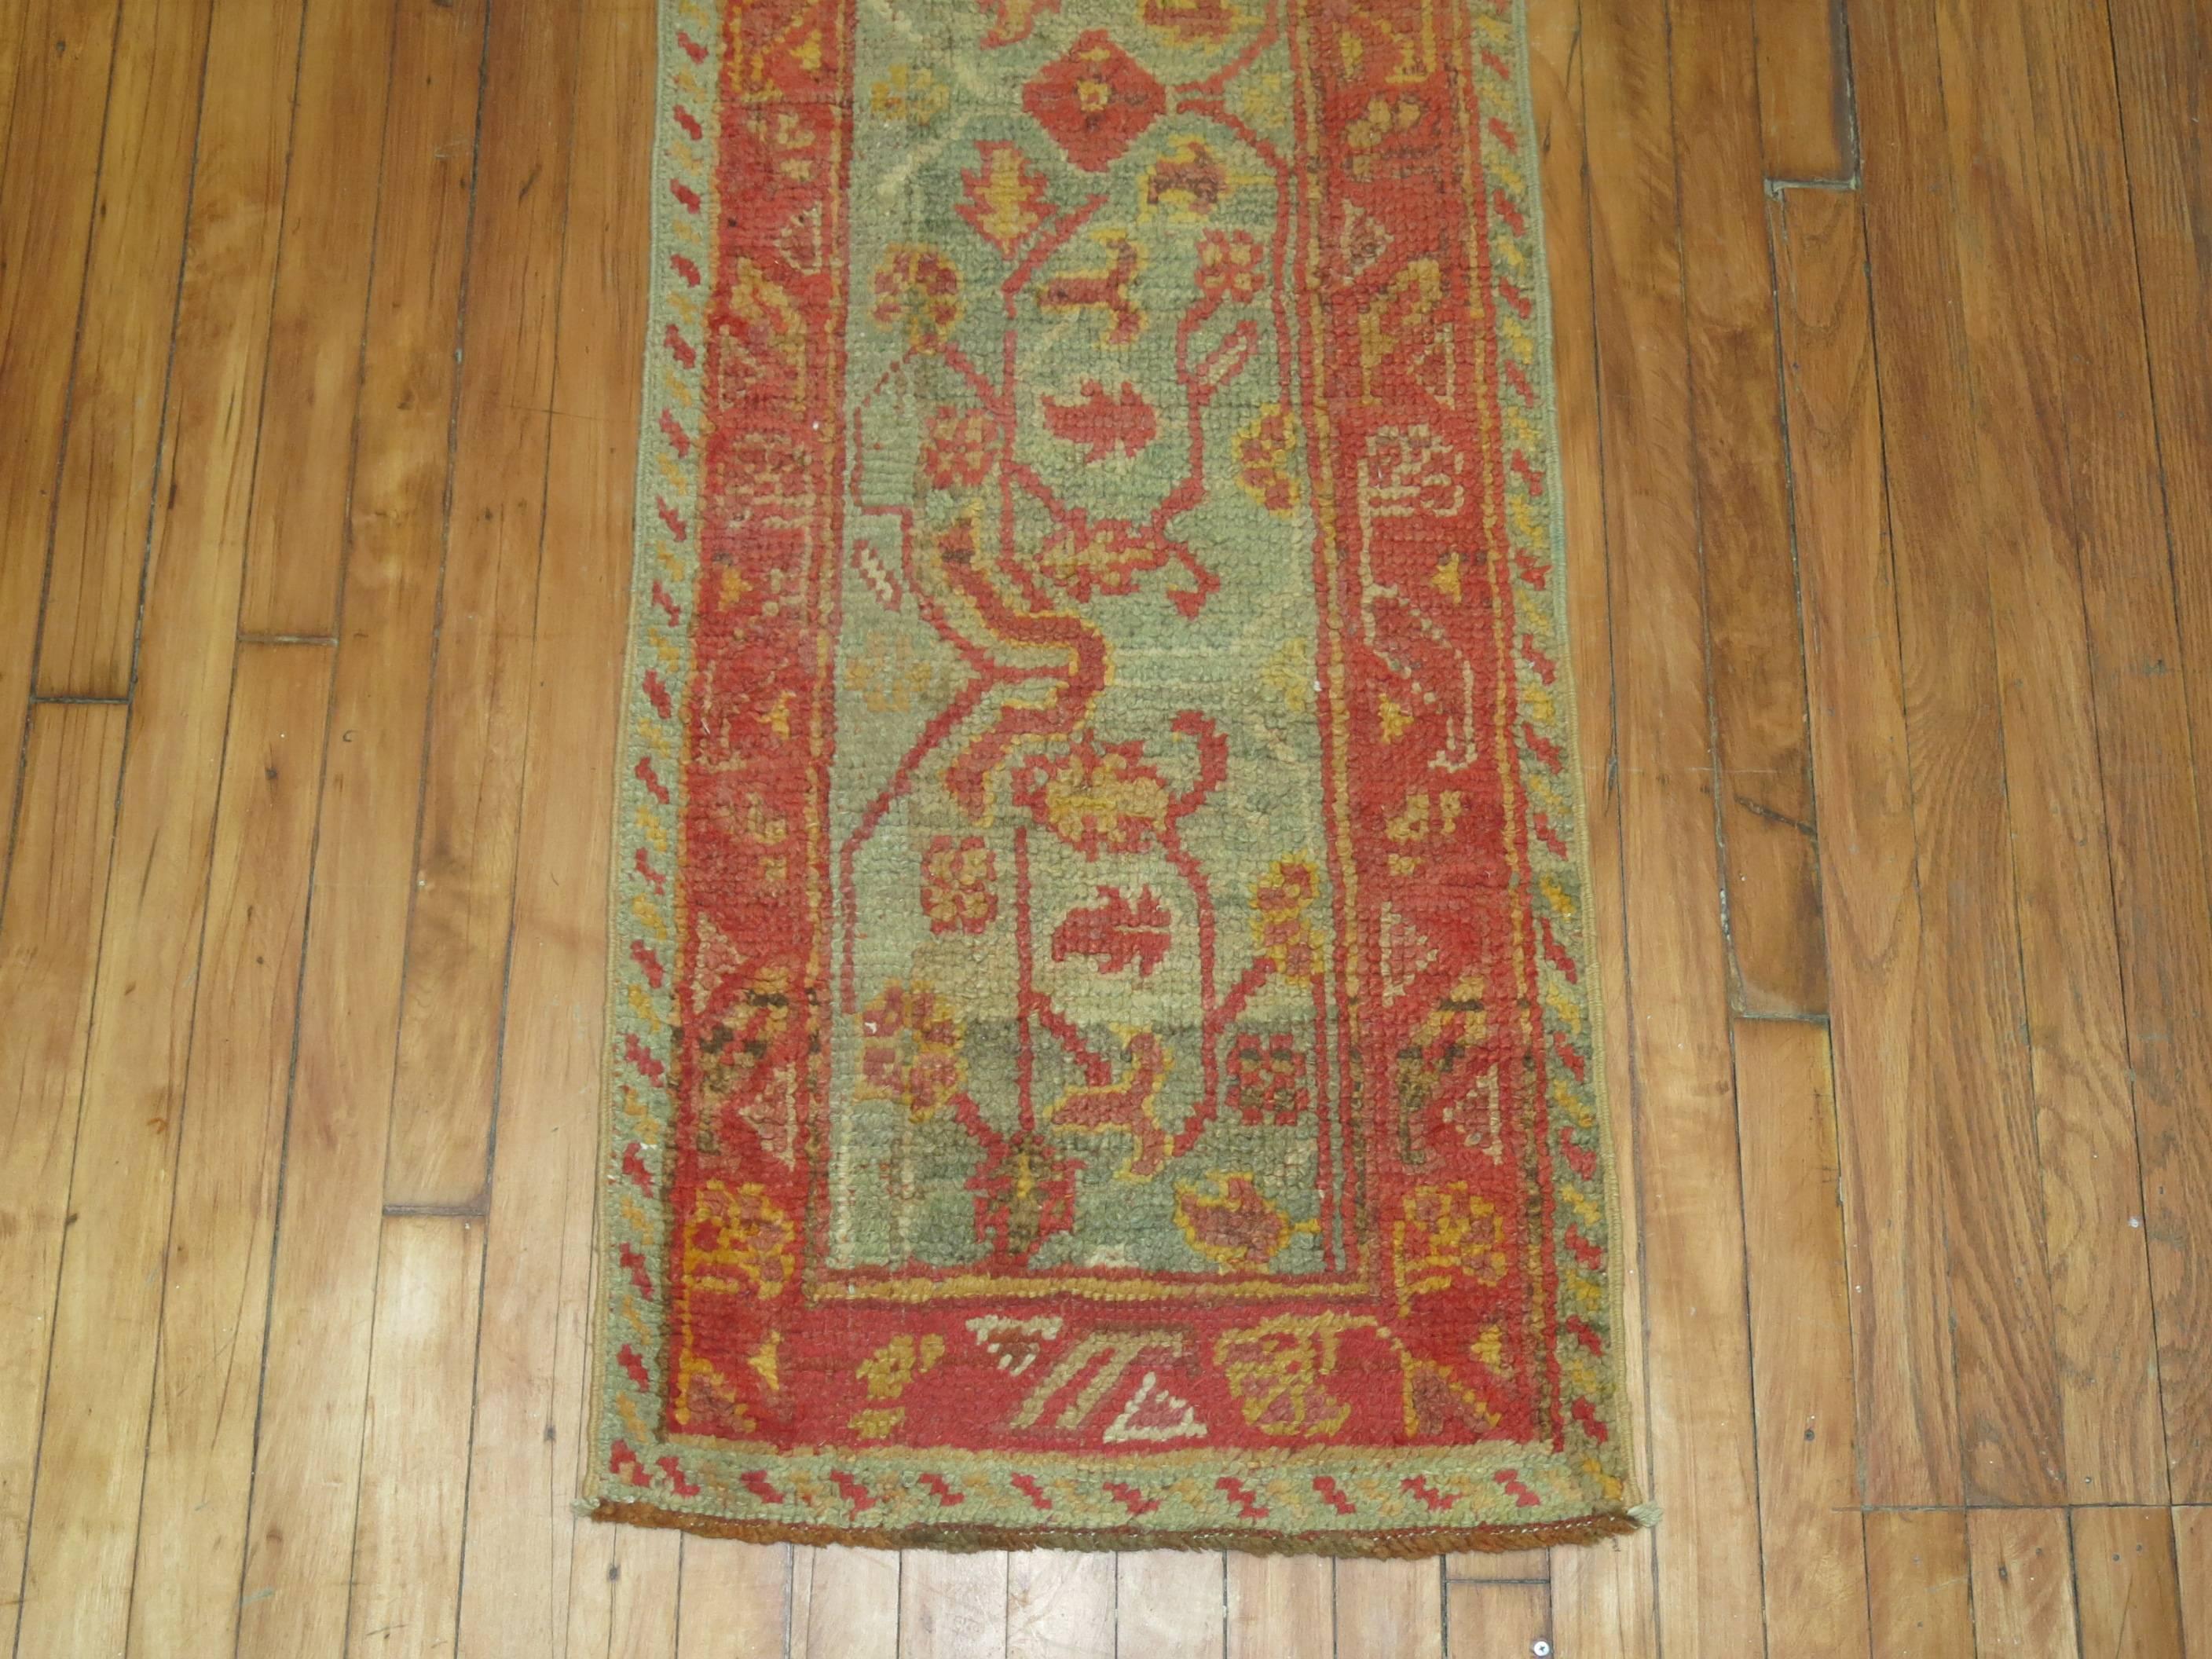 A rare size early 20th century antique Oushak runner in sage green and warm terracotta accents.

Measures: 1'9